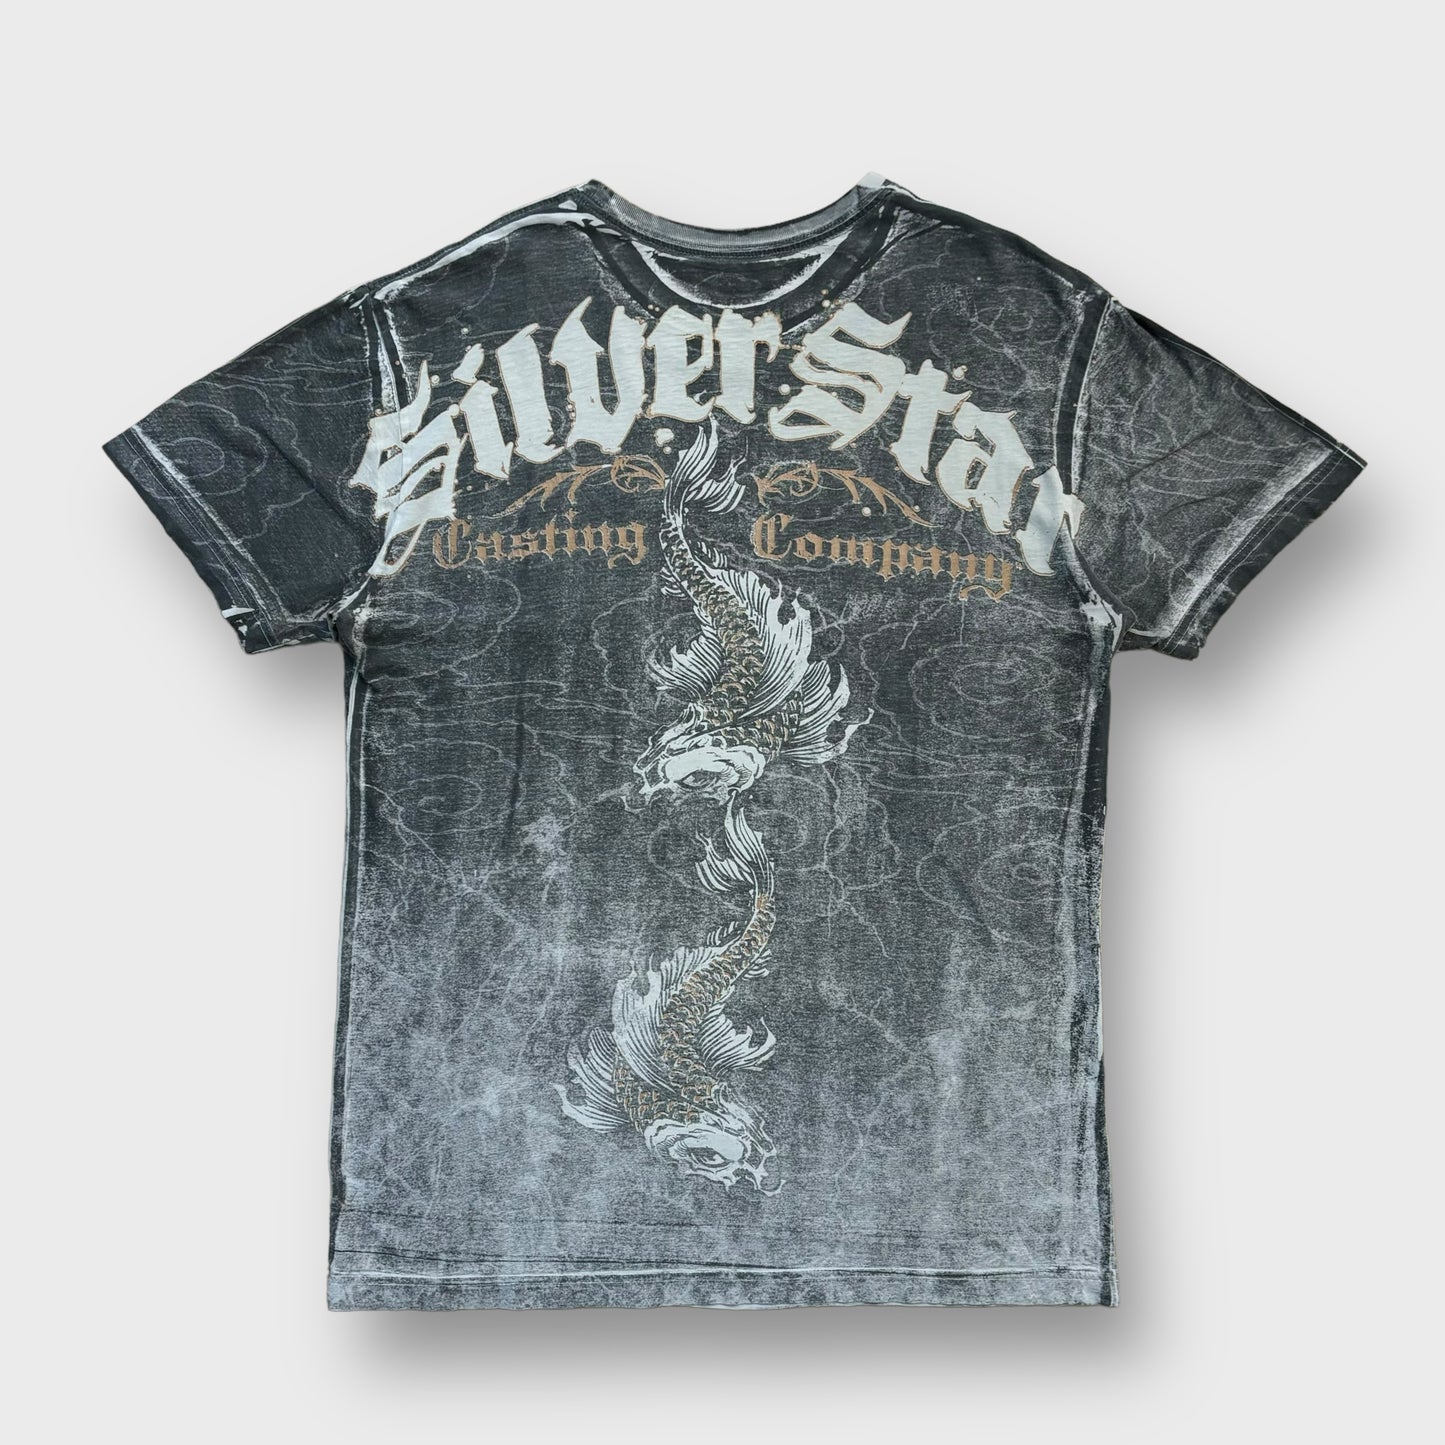 "SILVER STAR" graphic design t-shirt